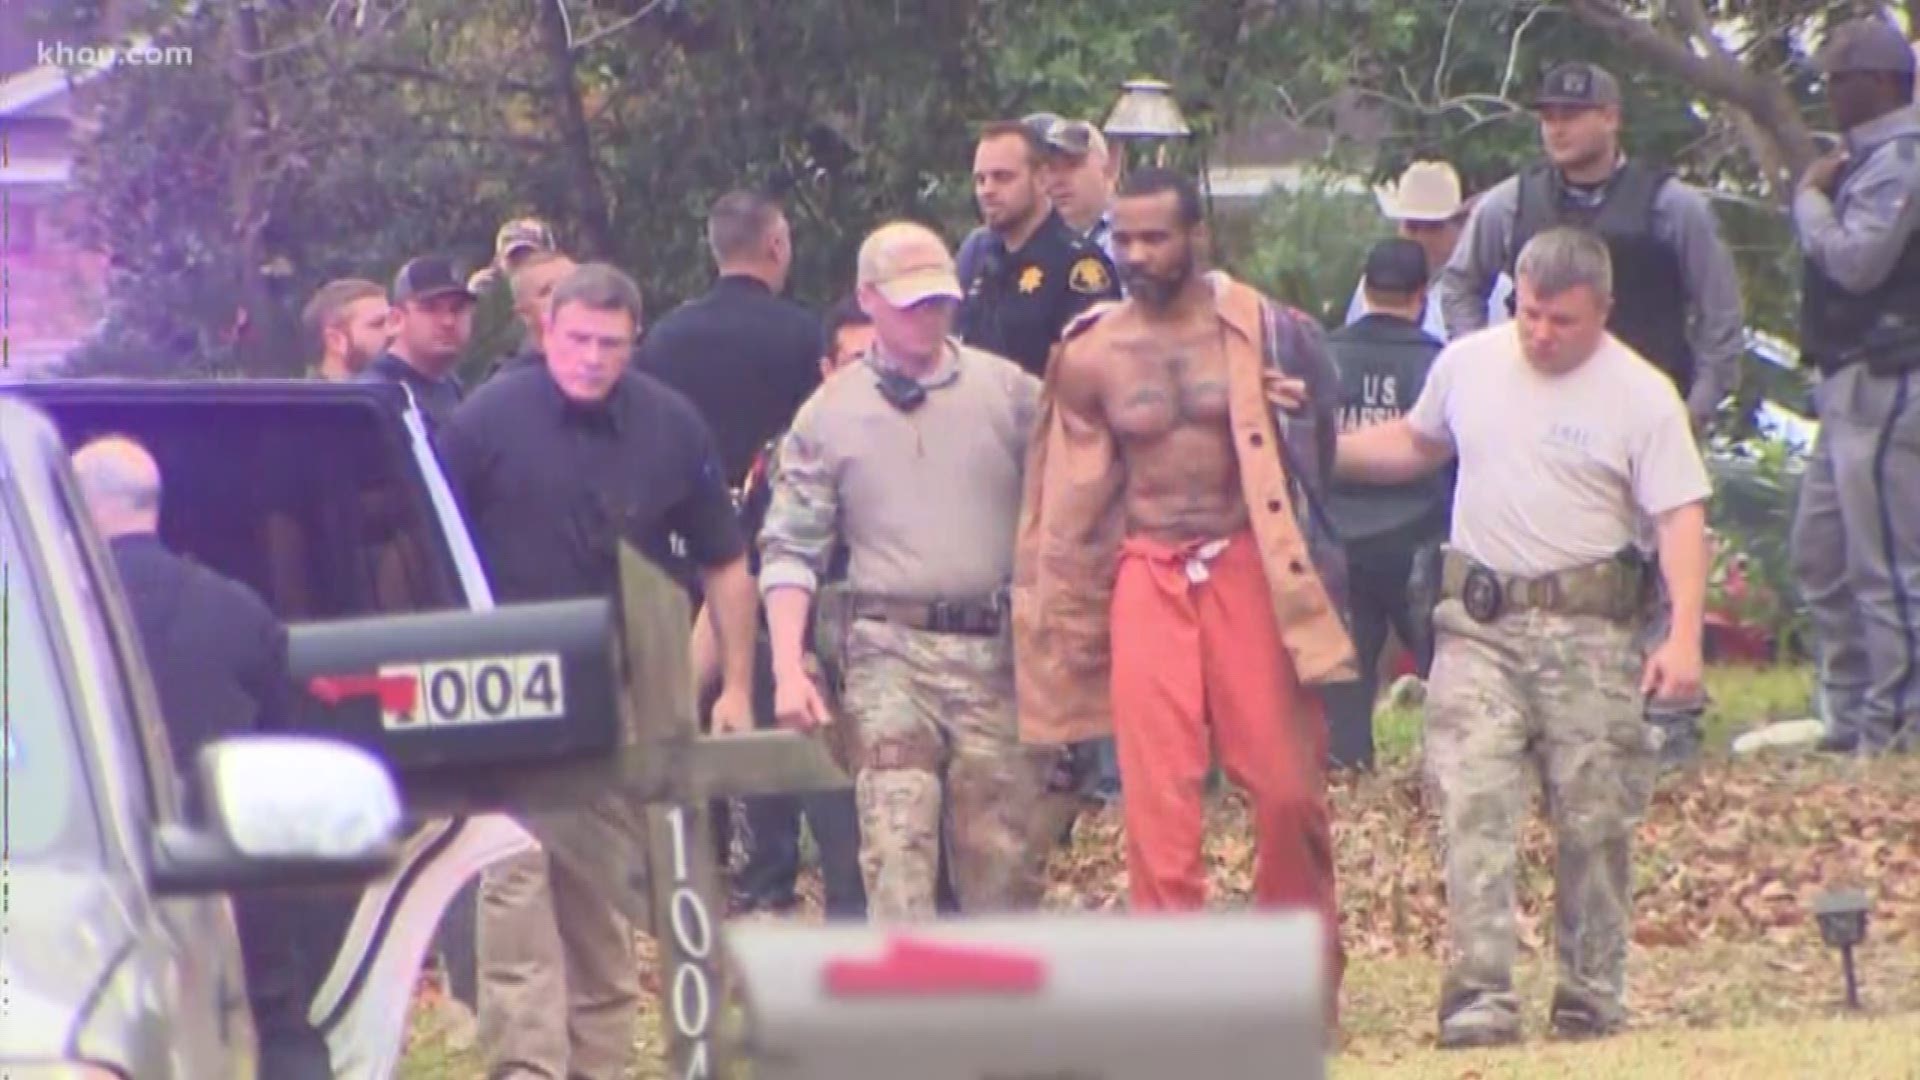 Prison Company That Transported Escapee Cedric Marks Is Closing Khou Com